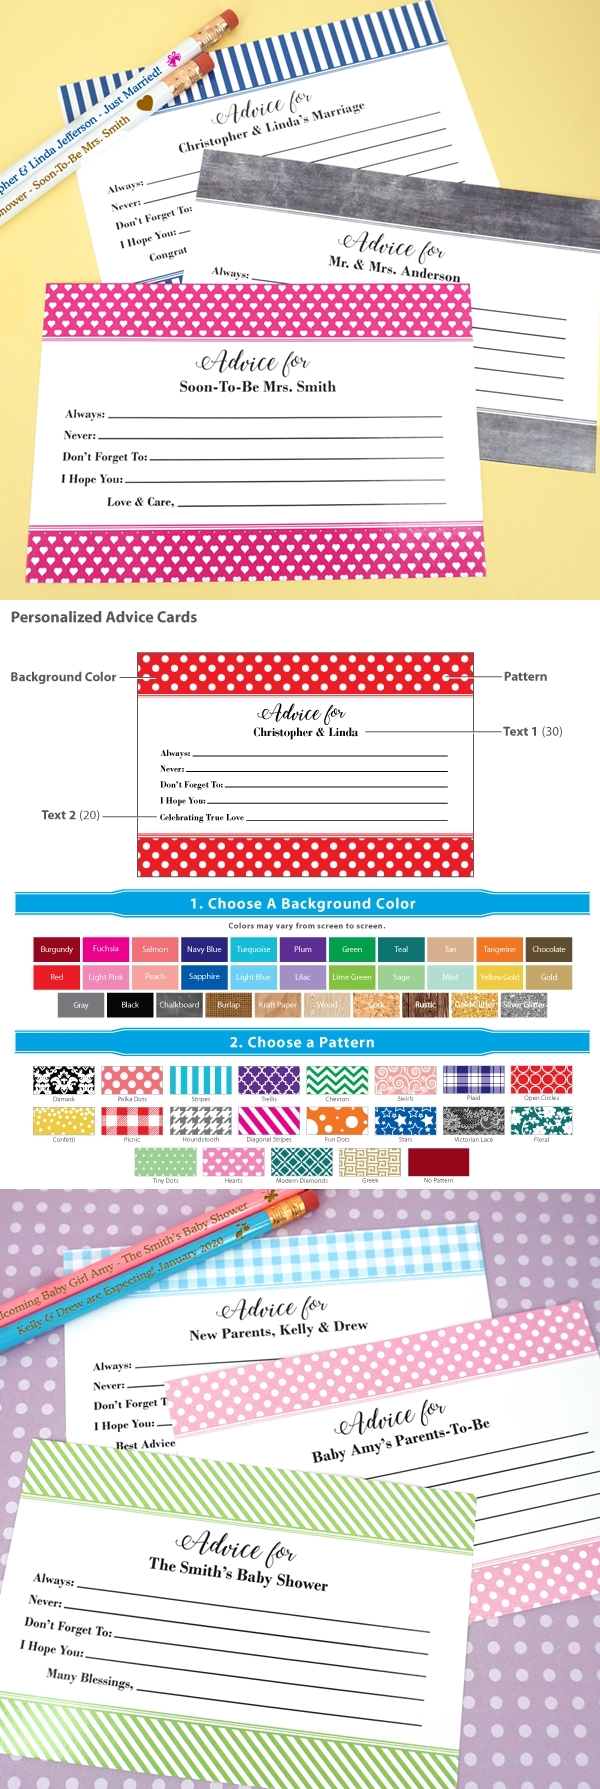 Personalized "Fill In The Blanks" Advice Cards (Set of 25)